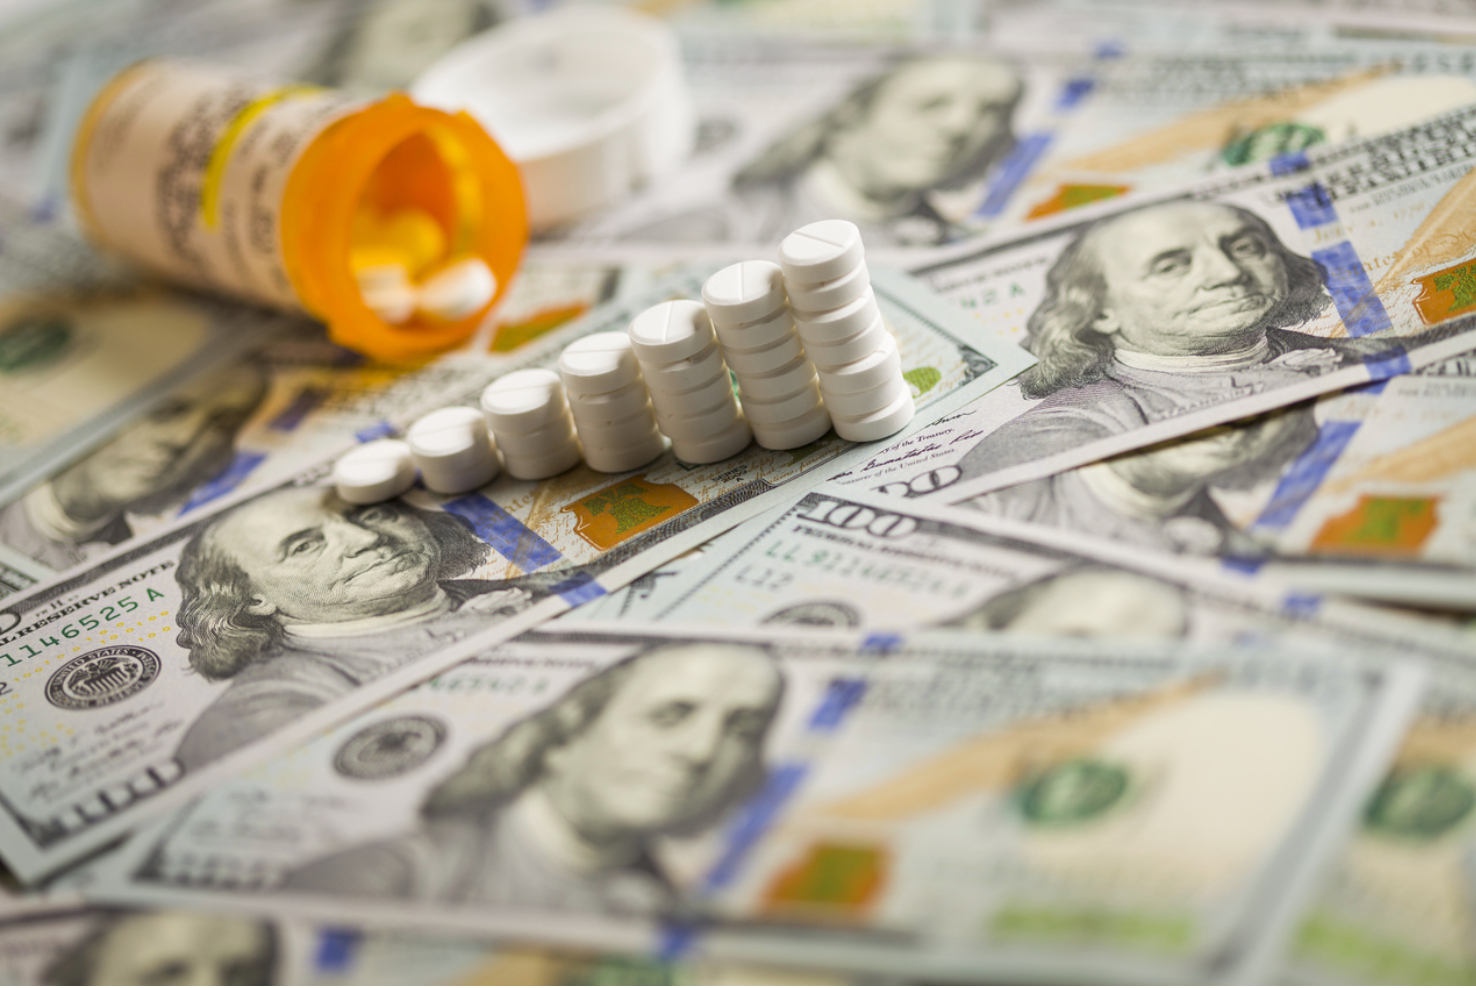 Finances May Not be Primary Factor in Patients Not Receiving Oral Anticancer Drugs 